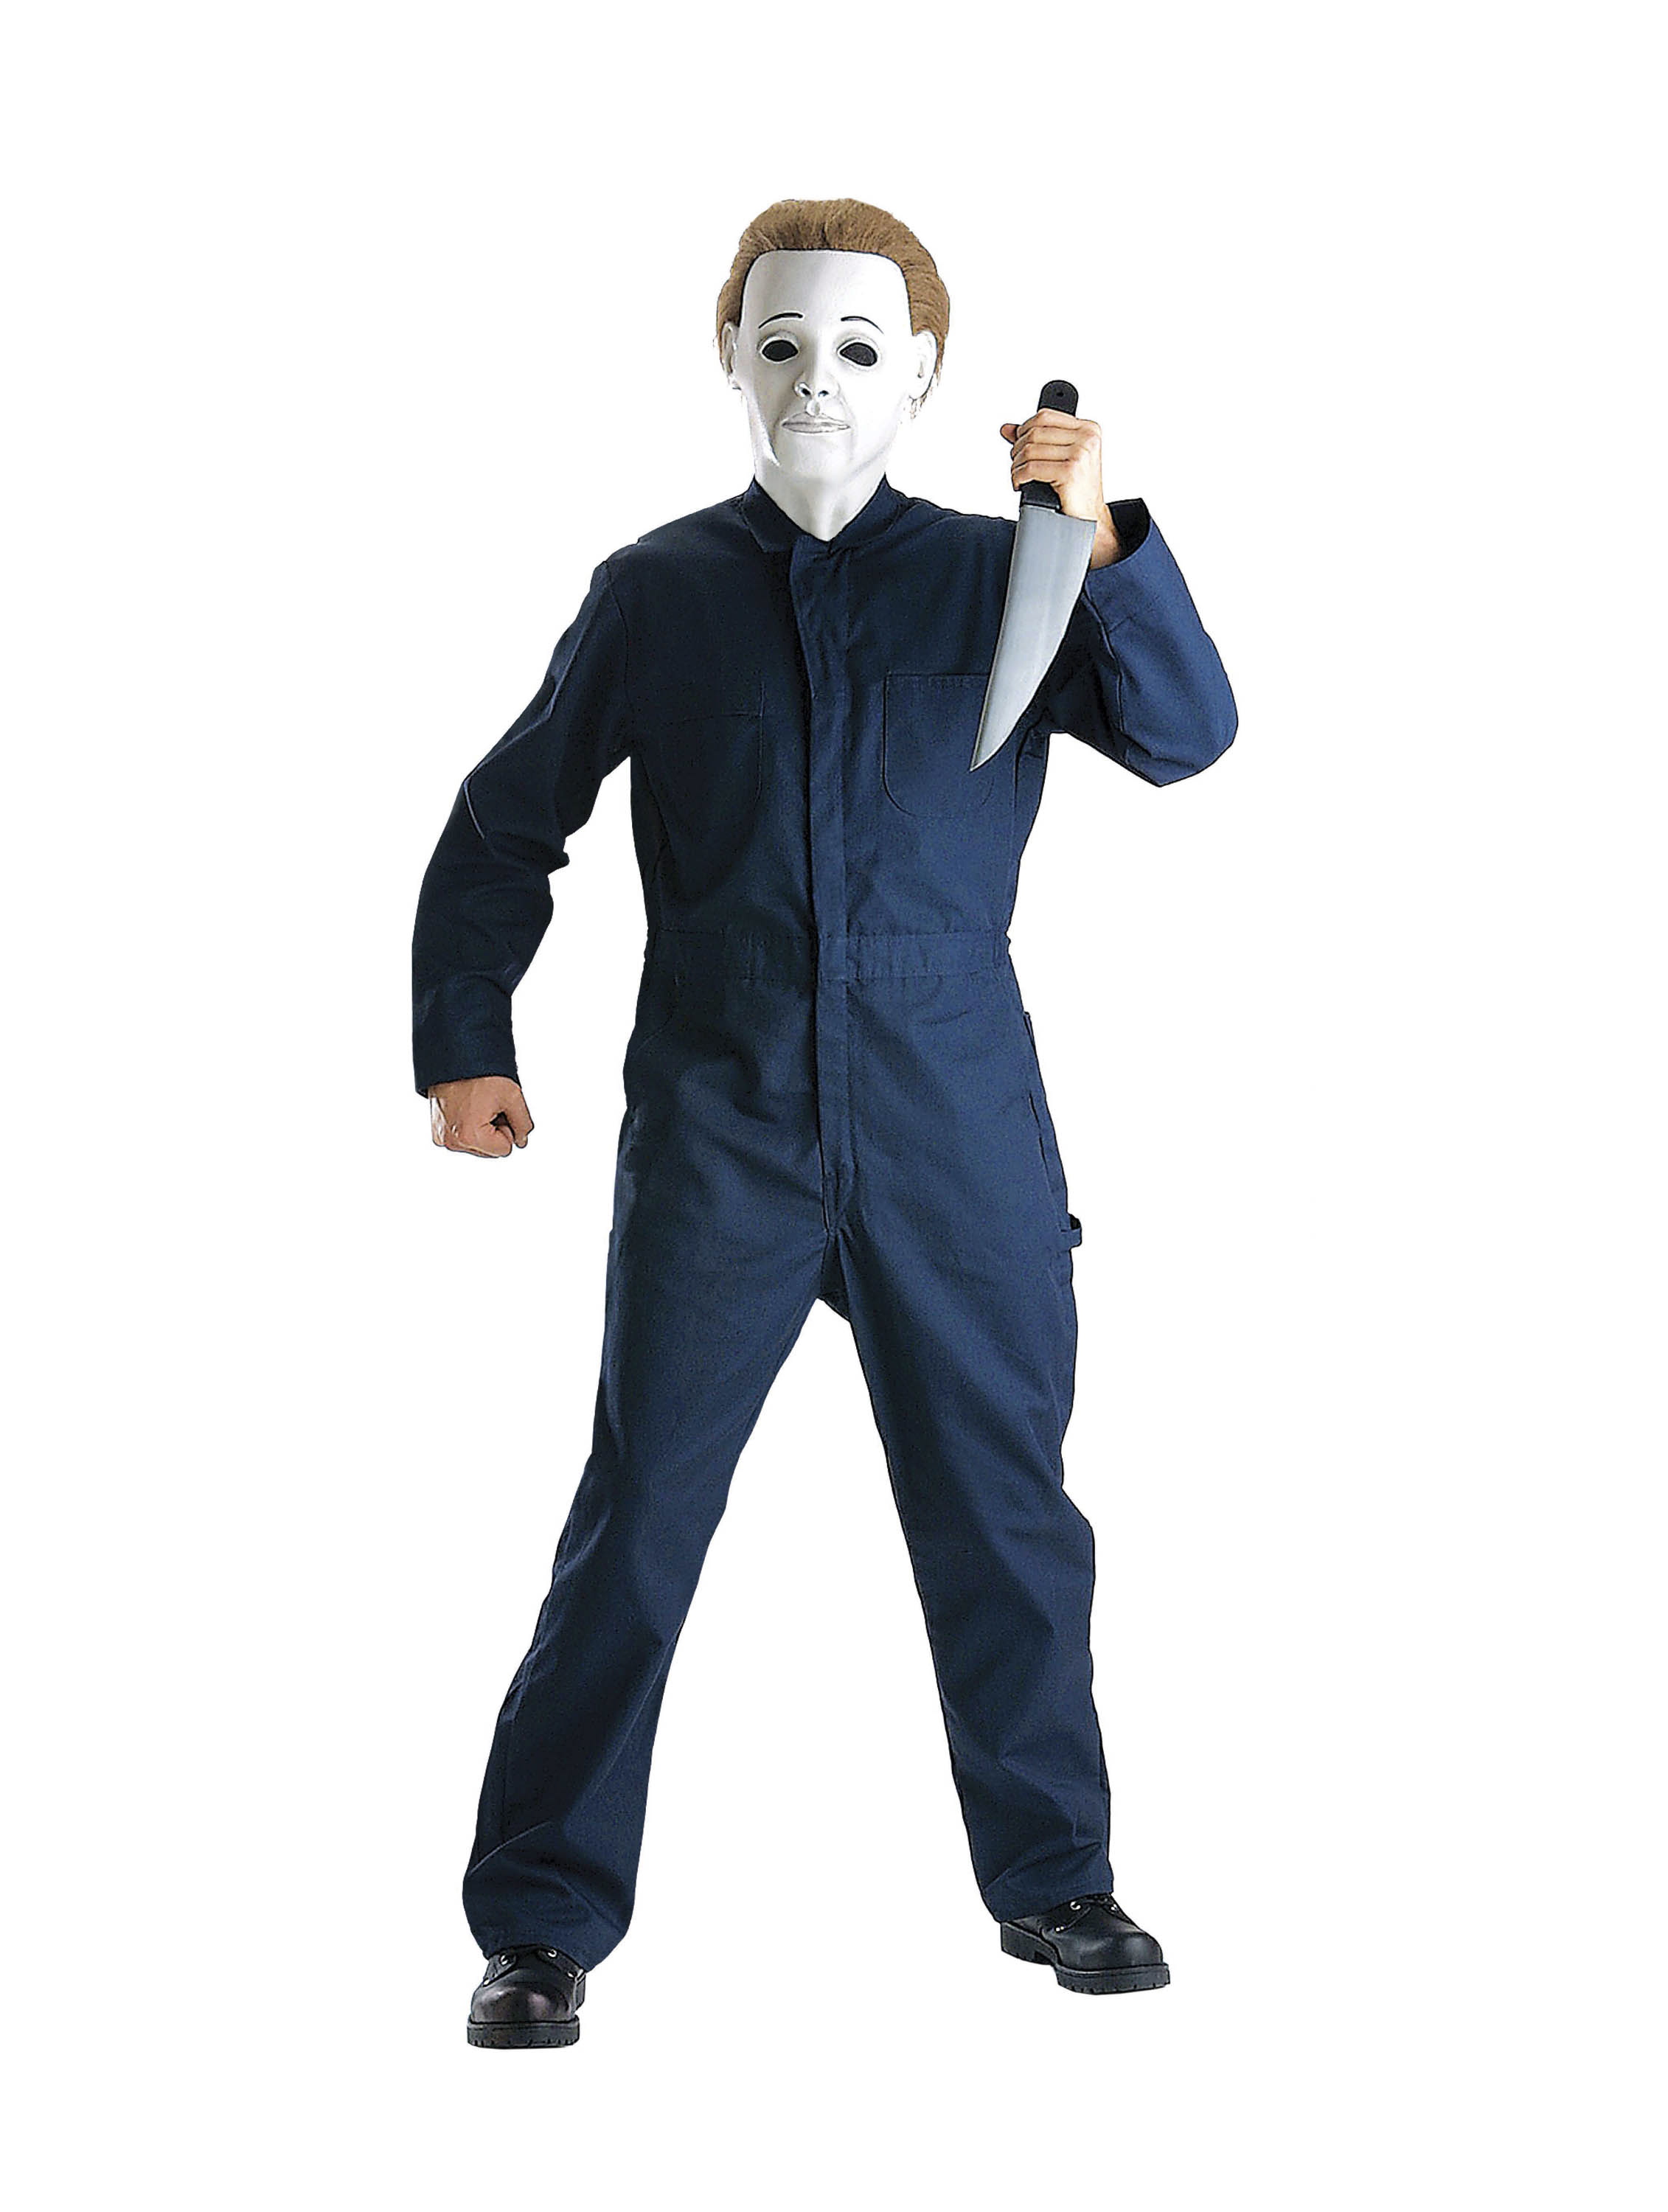 A boys costume depicting the horror figure Michael Myers from the &quot;Halloween&quot; film franchise.